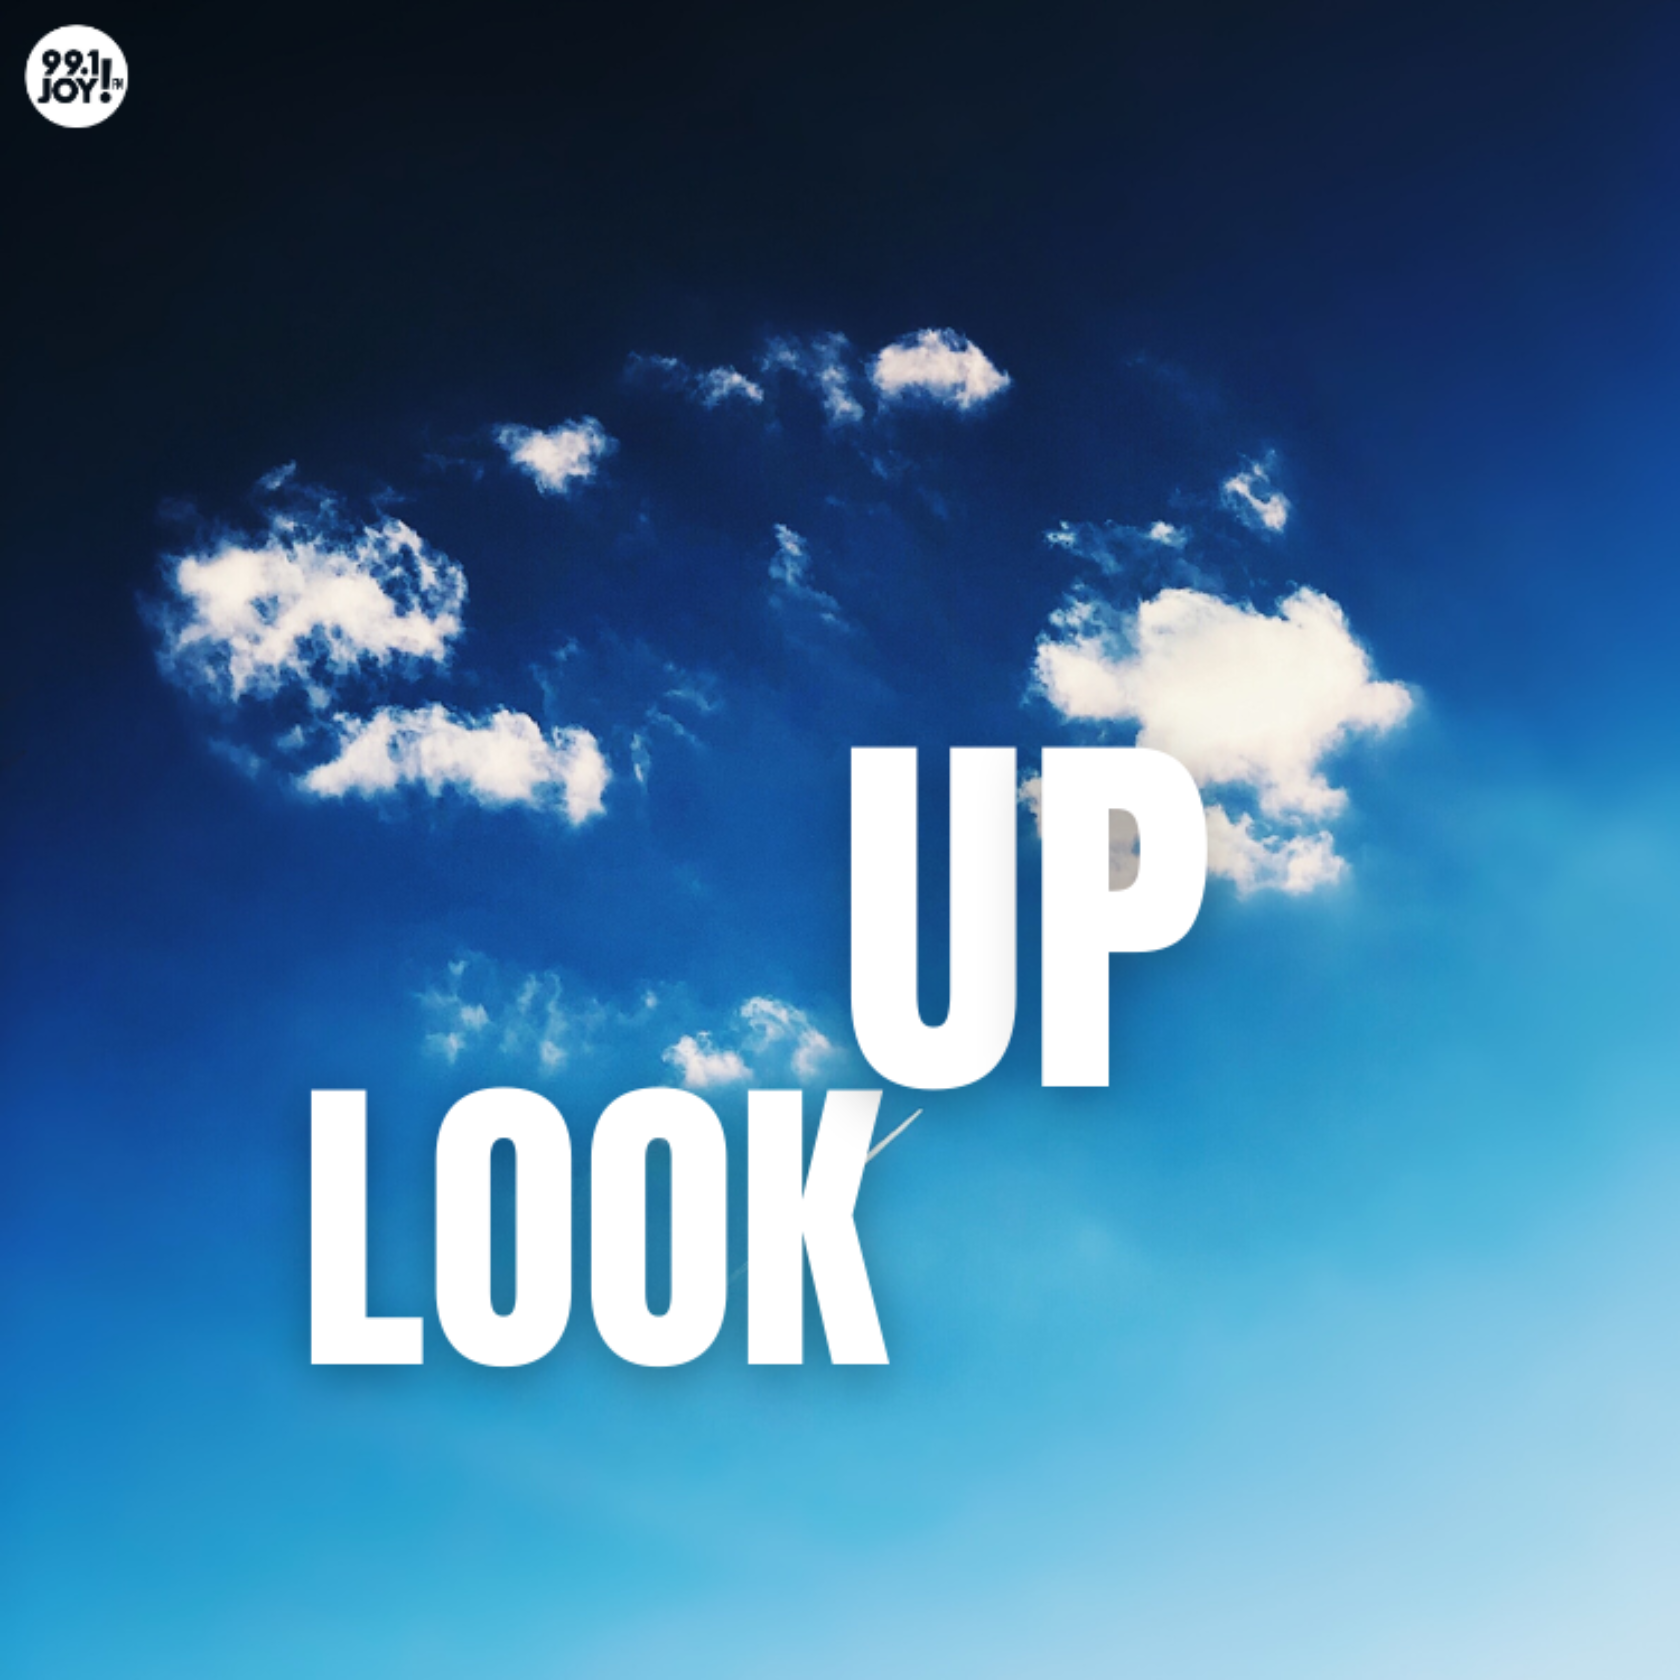 Just Look Up